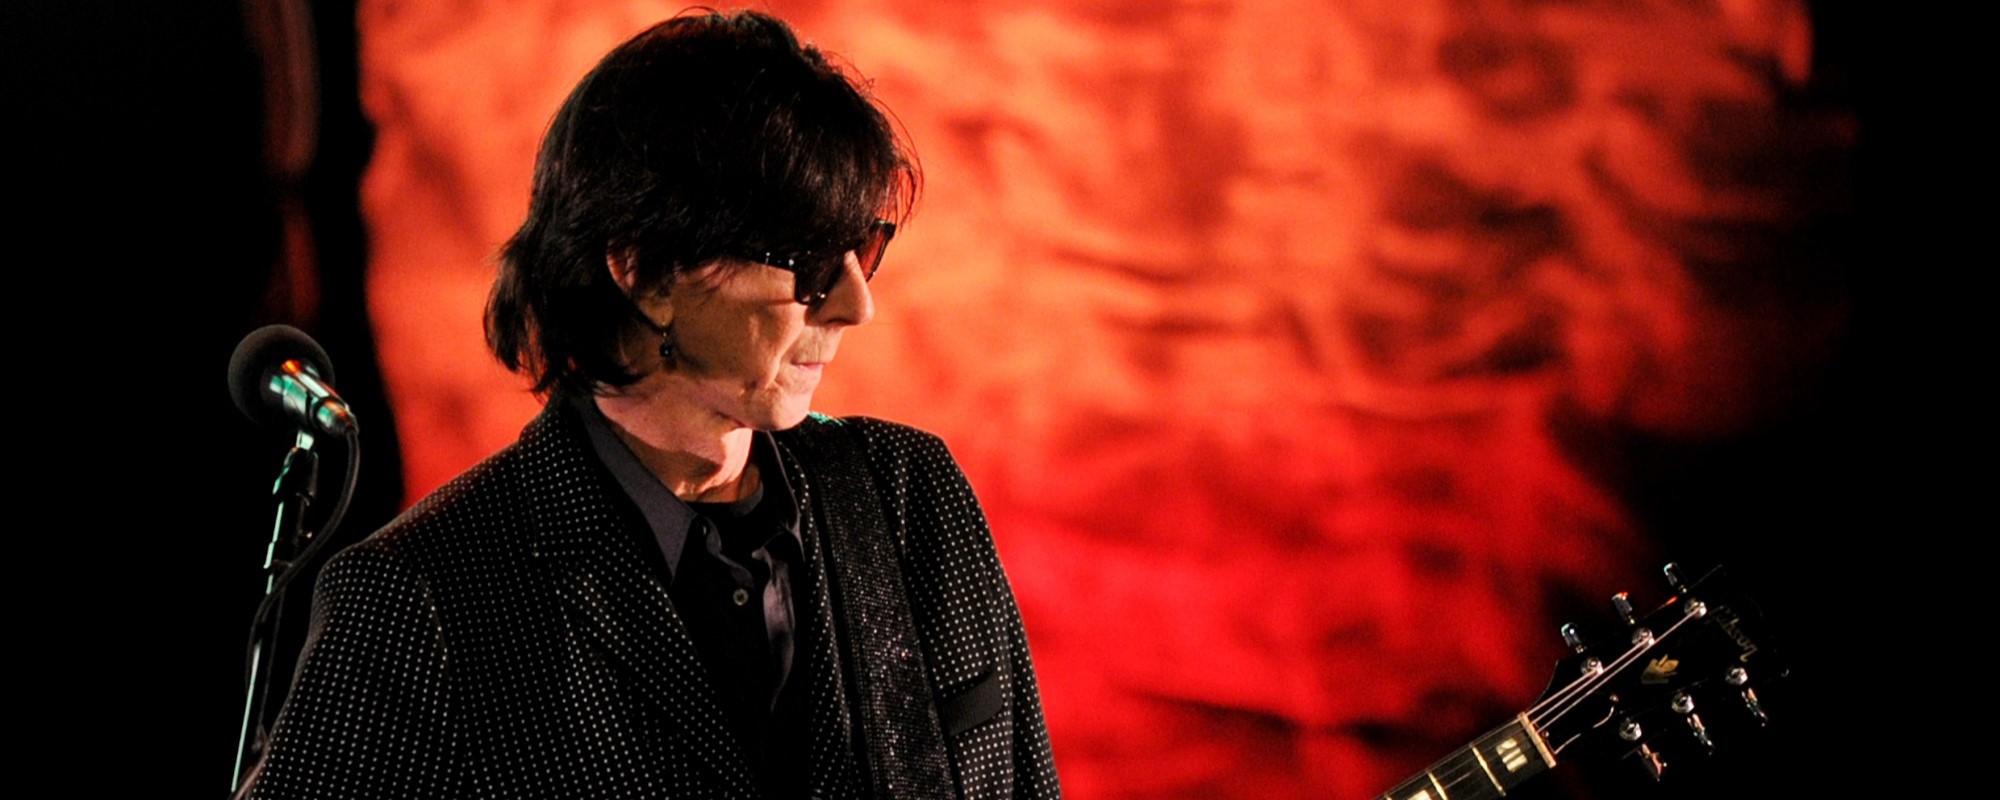 5 Fascinating Facts About Late Cars Frontman Ric Ocasek in Honor of His 80th Birthday